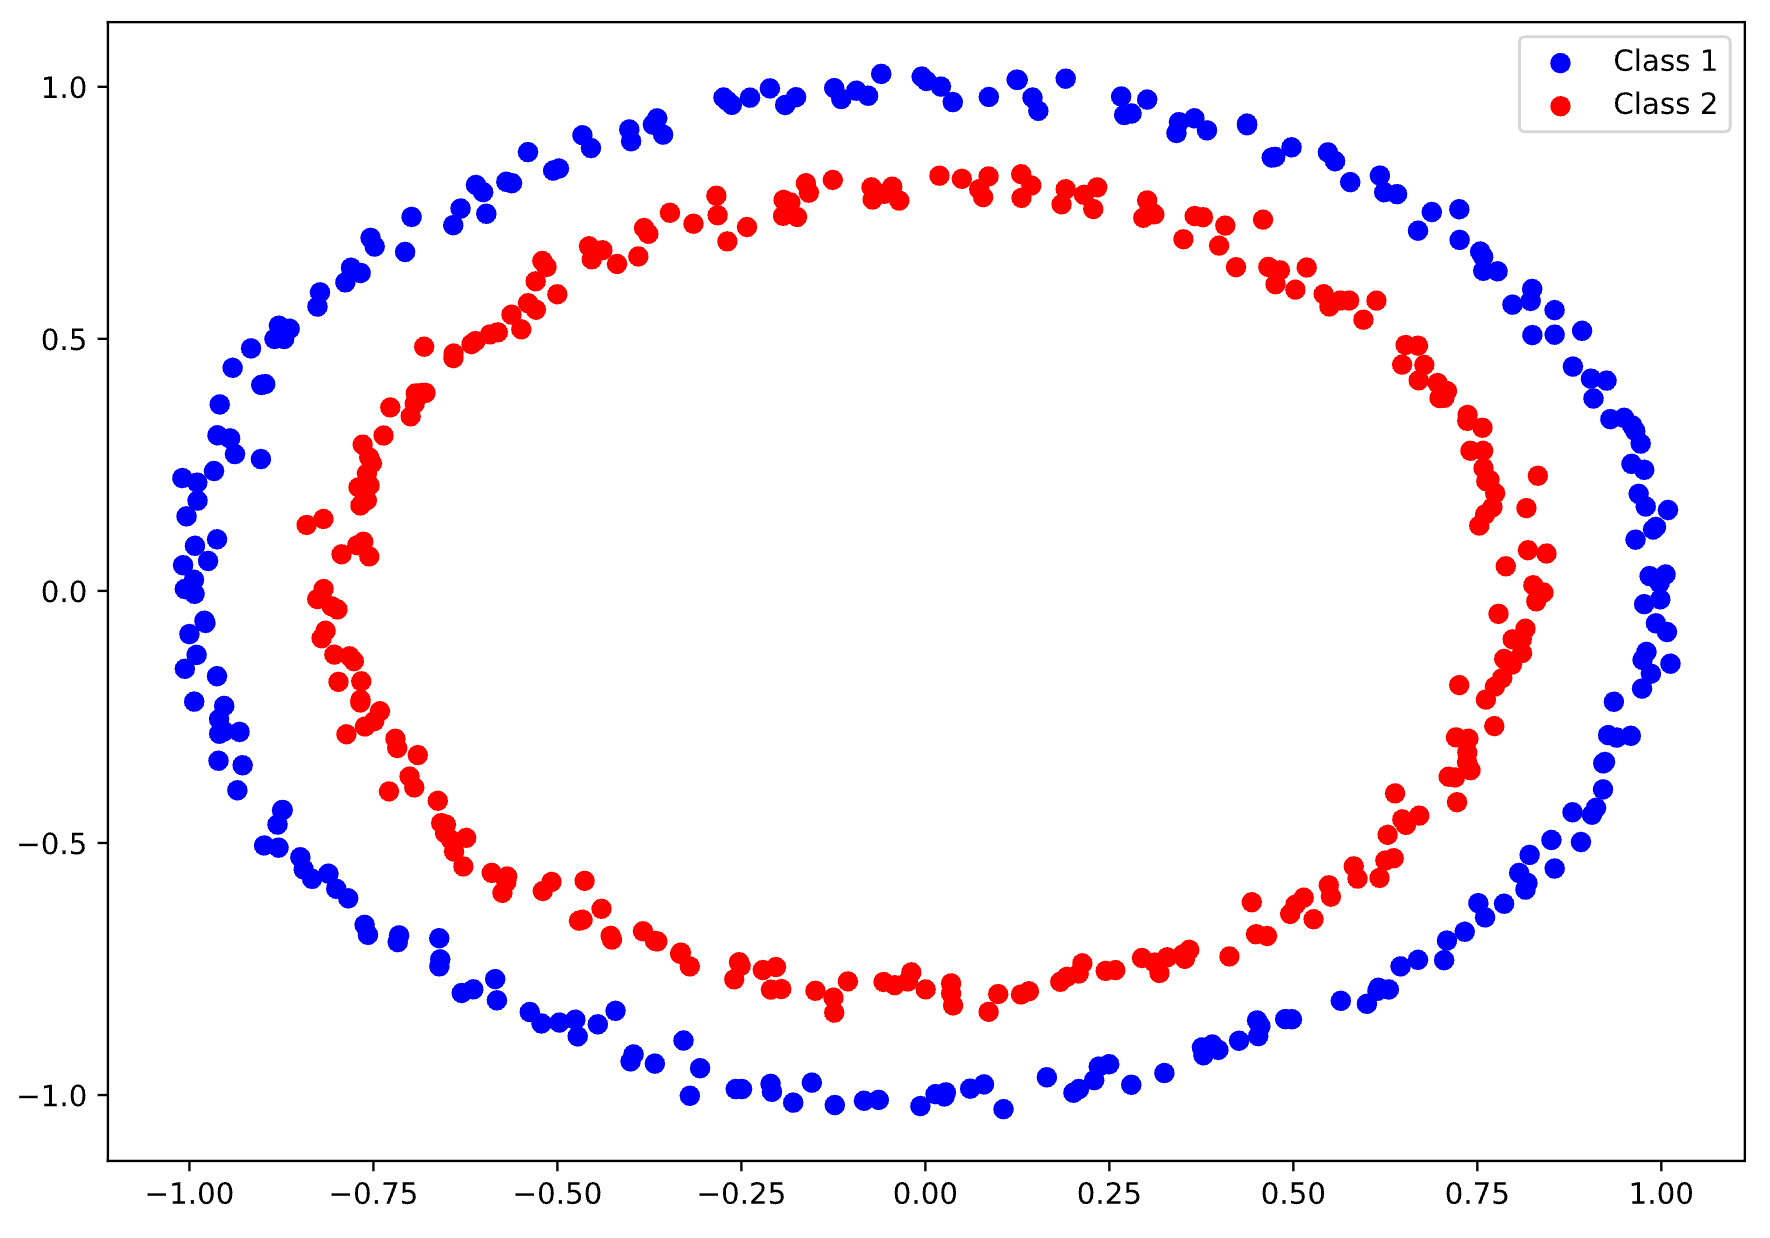 Image 2 - Circular dataset with two classes (Image by author)